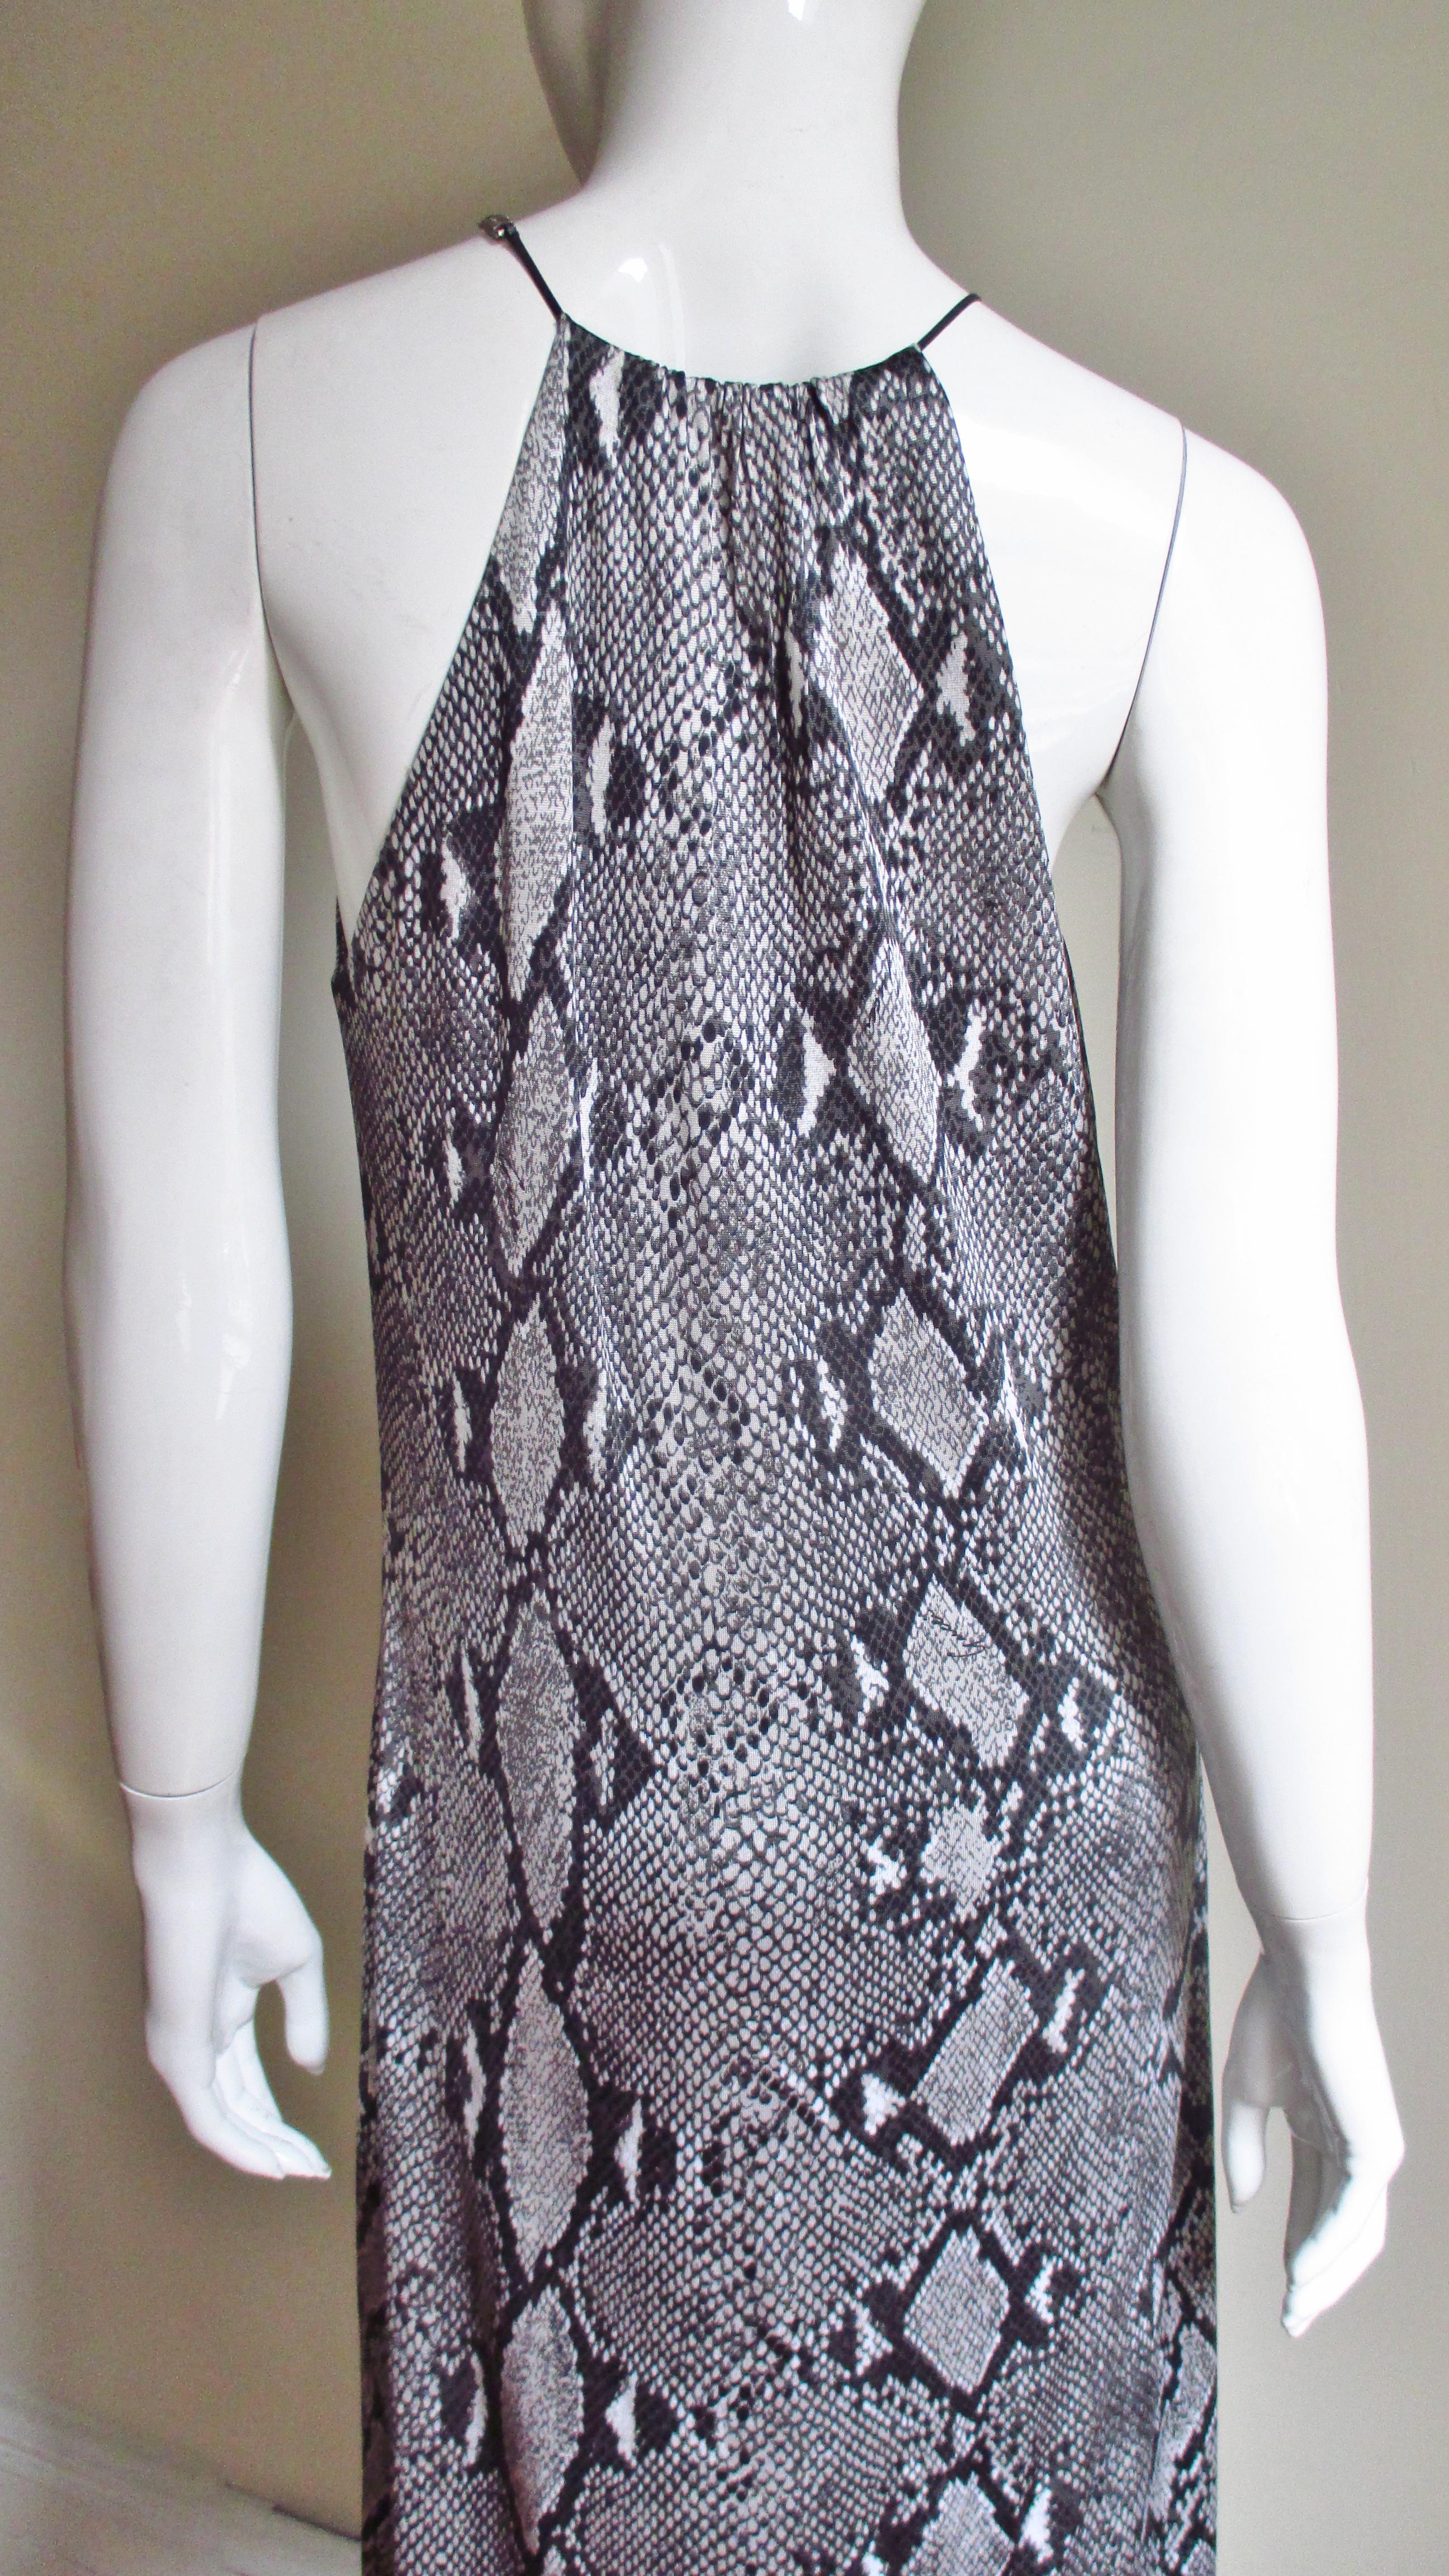 Tom Ford for Gucci Python Print Jersey Dress 6